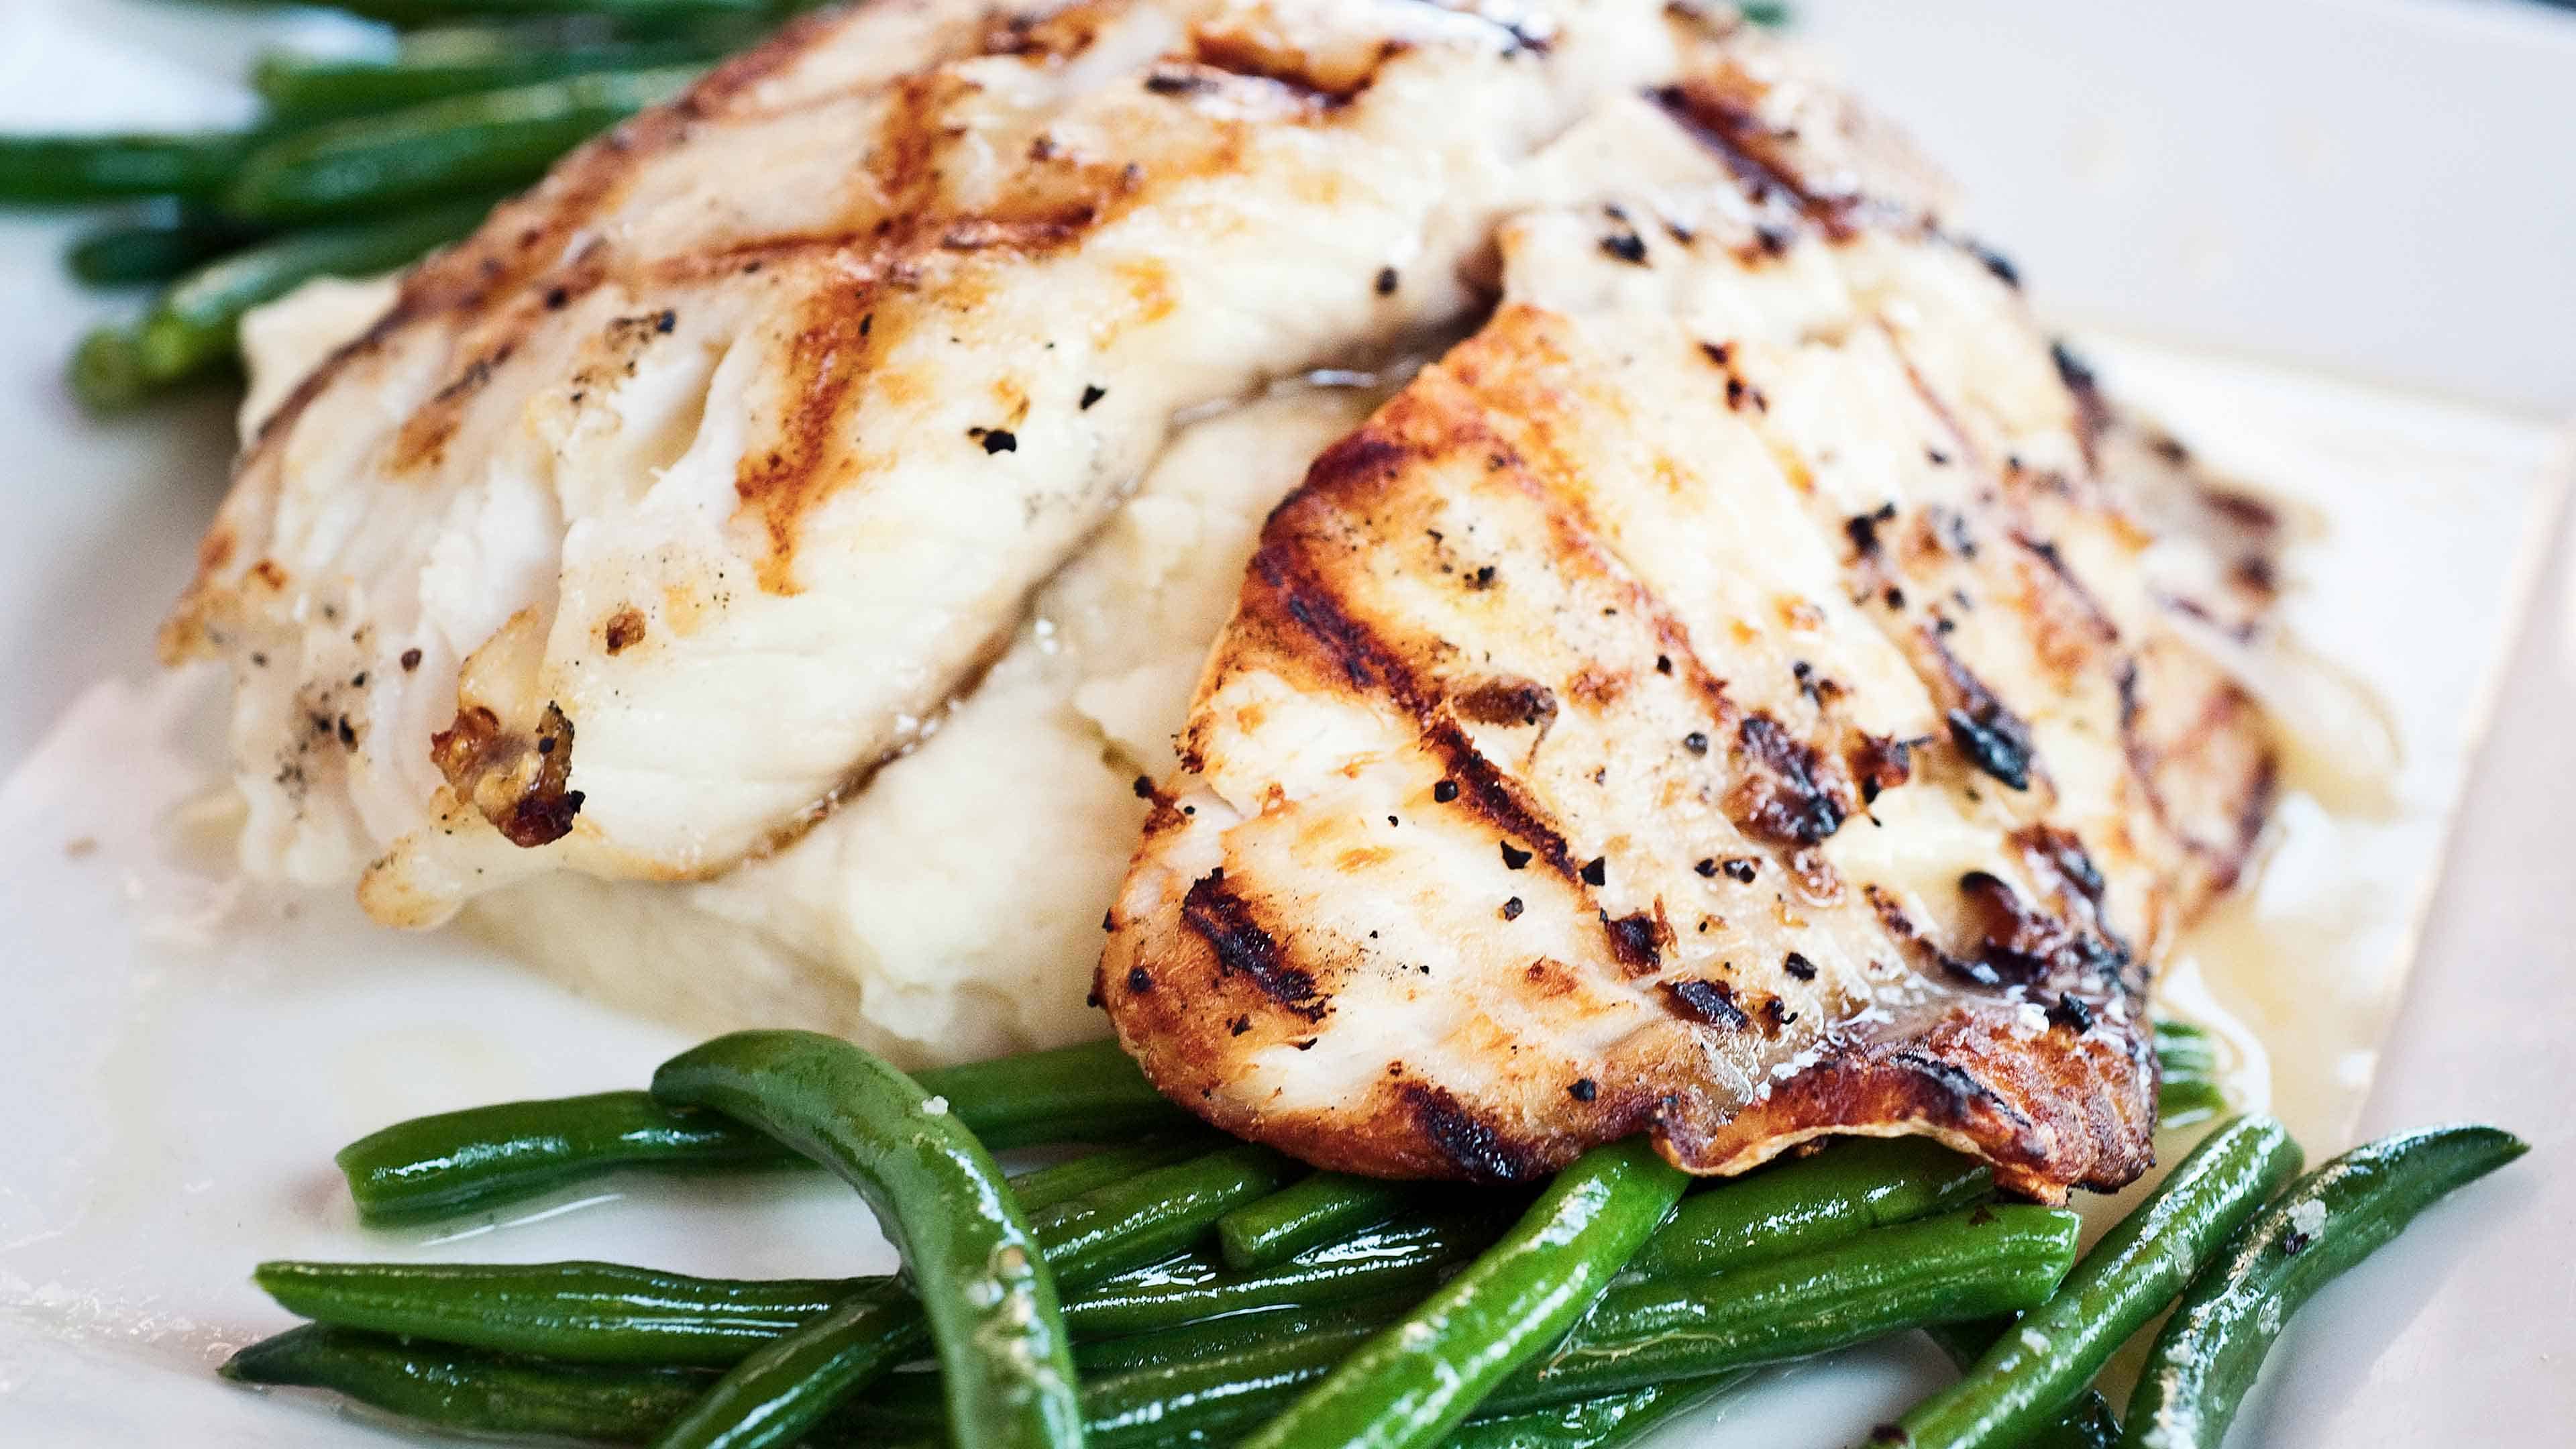 Tips for Grilling Fish